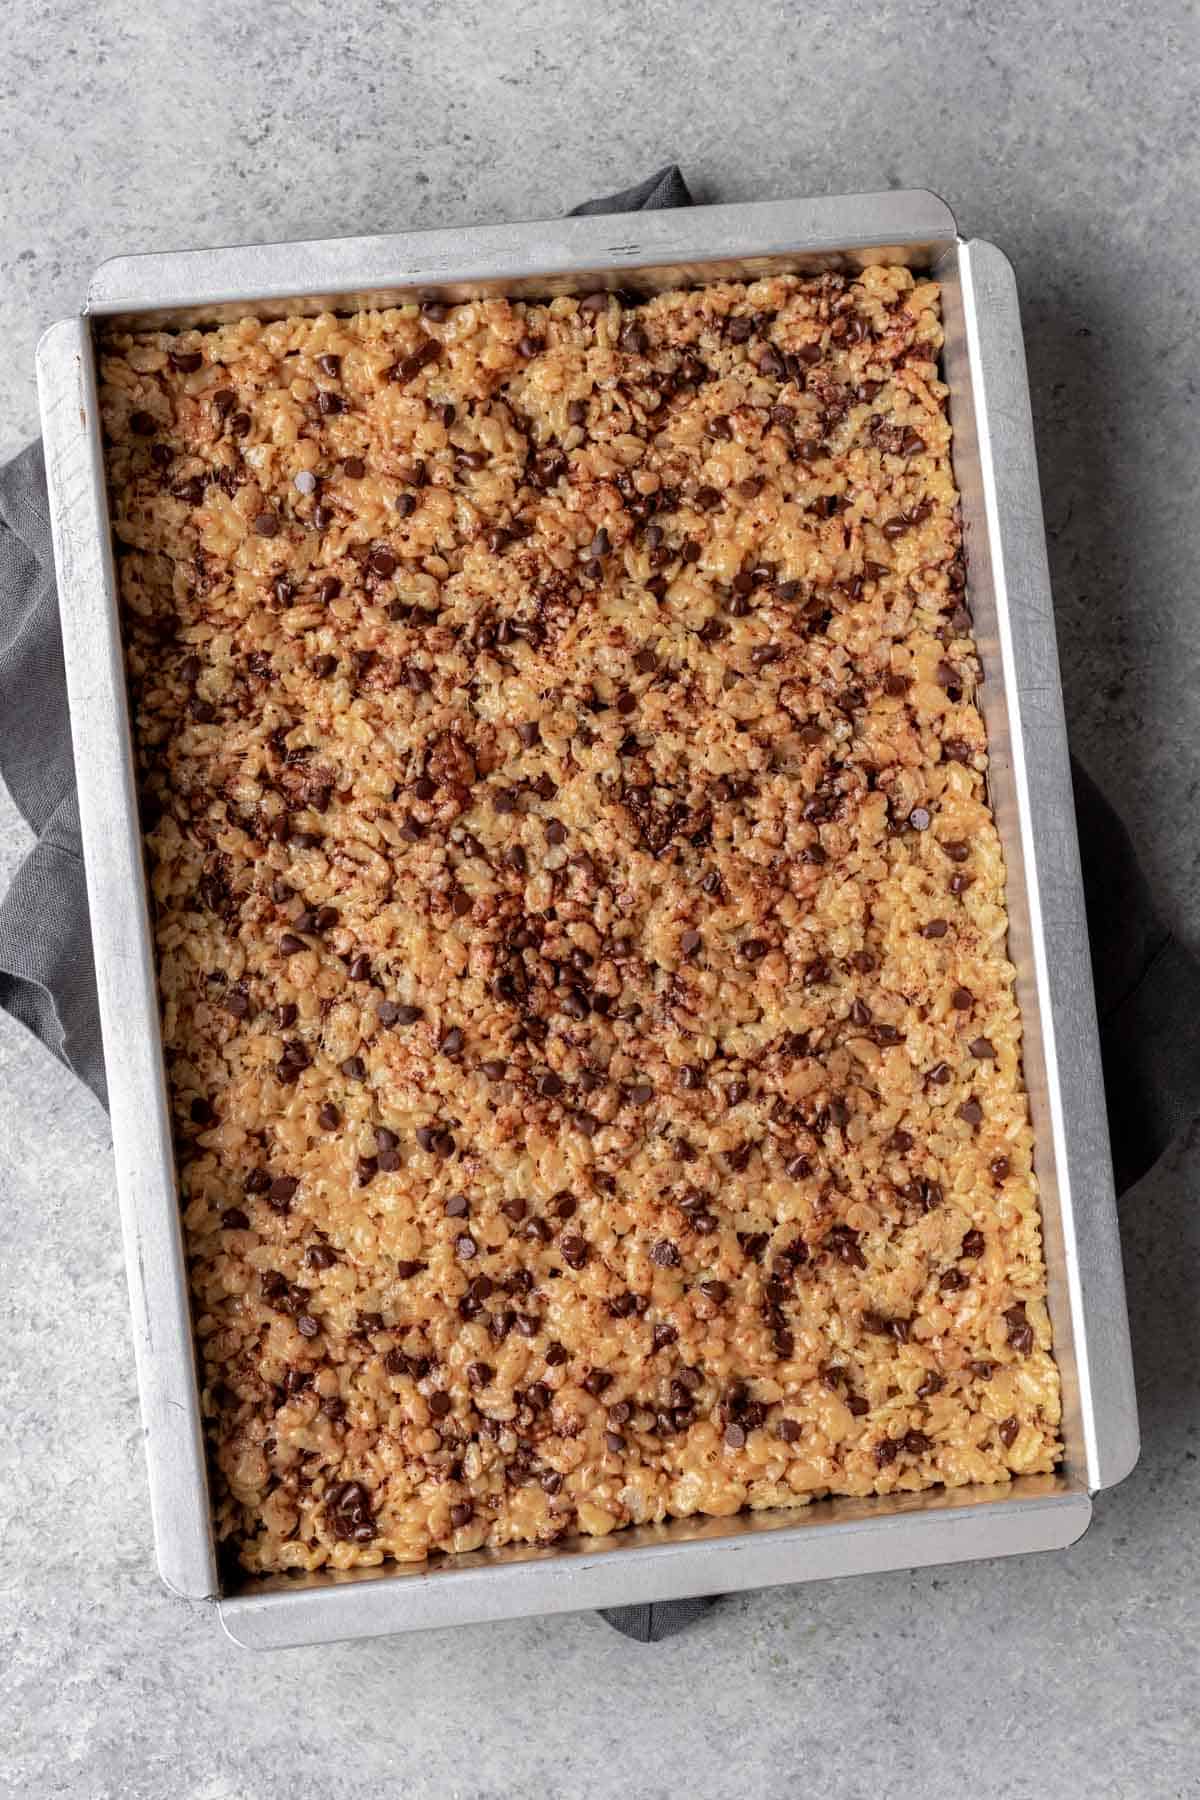 Peanut butter chocolate chip rice krispie treats in a 9x13 pan.